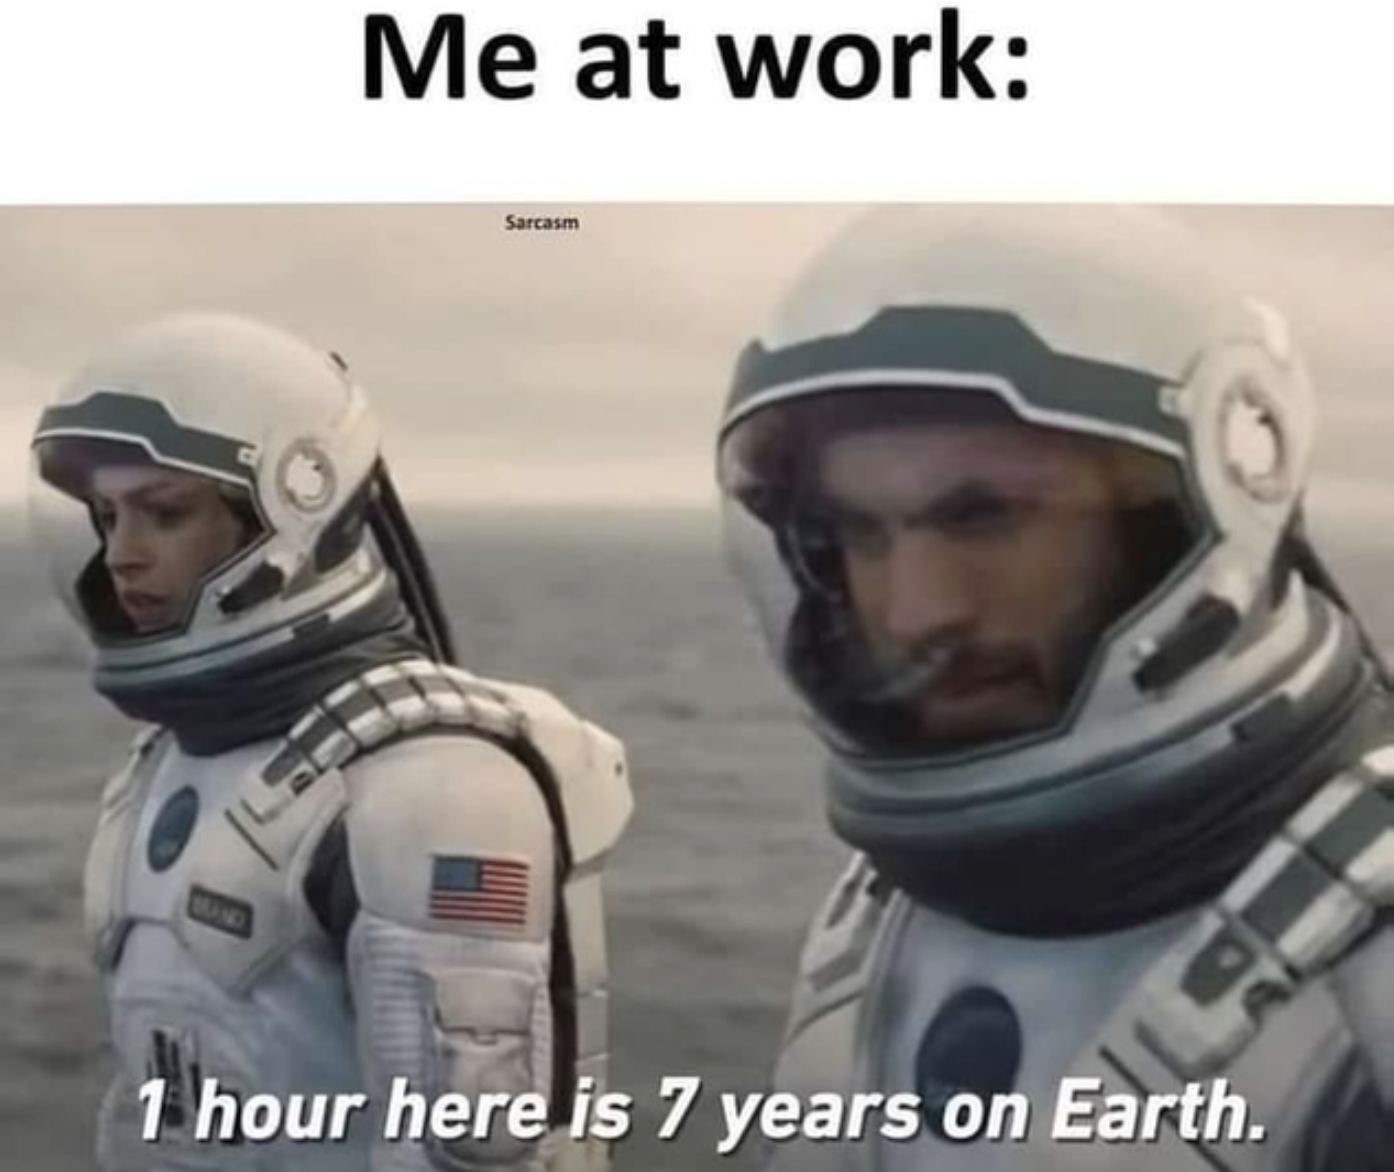 Work memes - bad day at work meme - Me at work Sarcasm 1 hour here is 7 years on Earth.